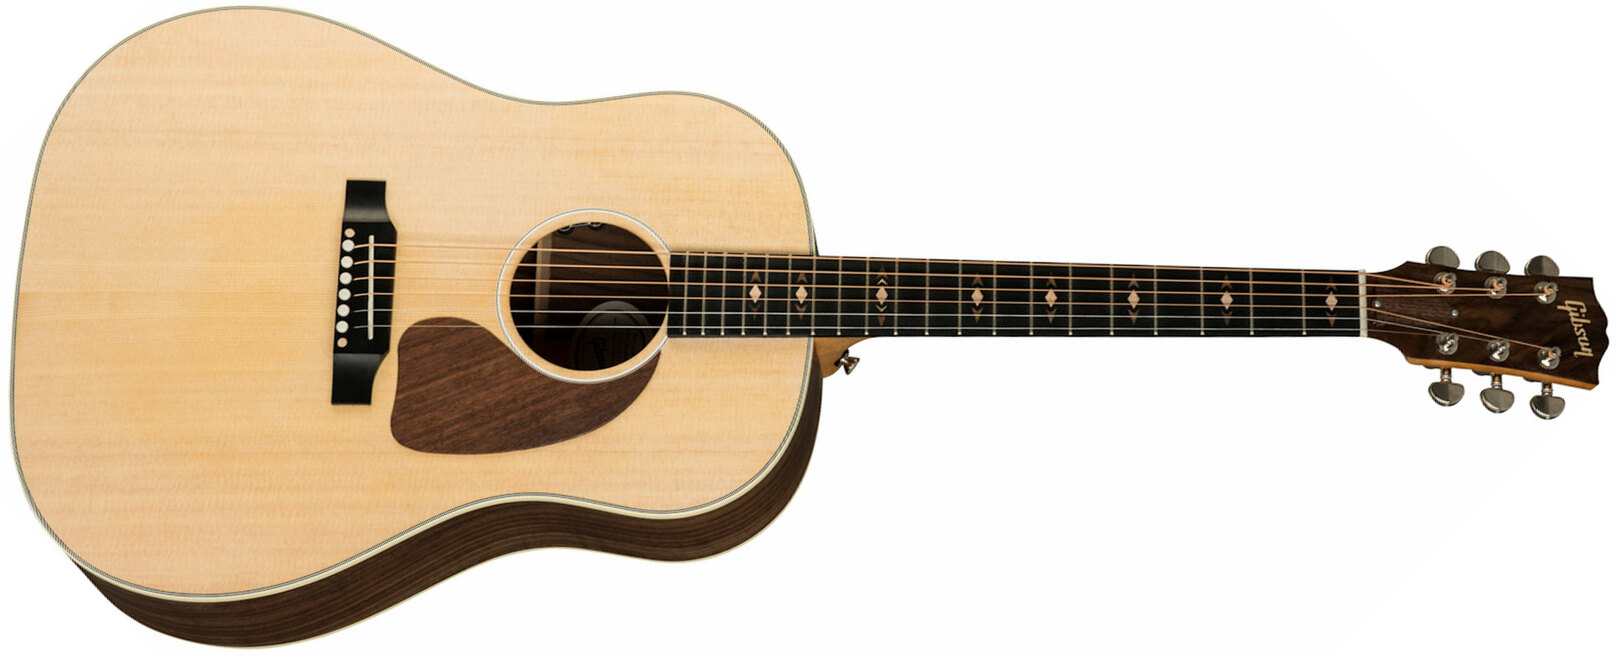 Gibson J-45 Sustainable 2019 Epicea Noyer Ric - Antique Natural - Electro acoustic guitar - Main picture